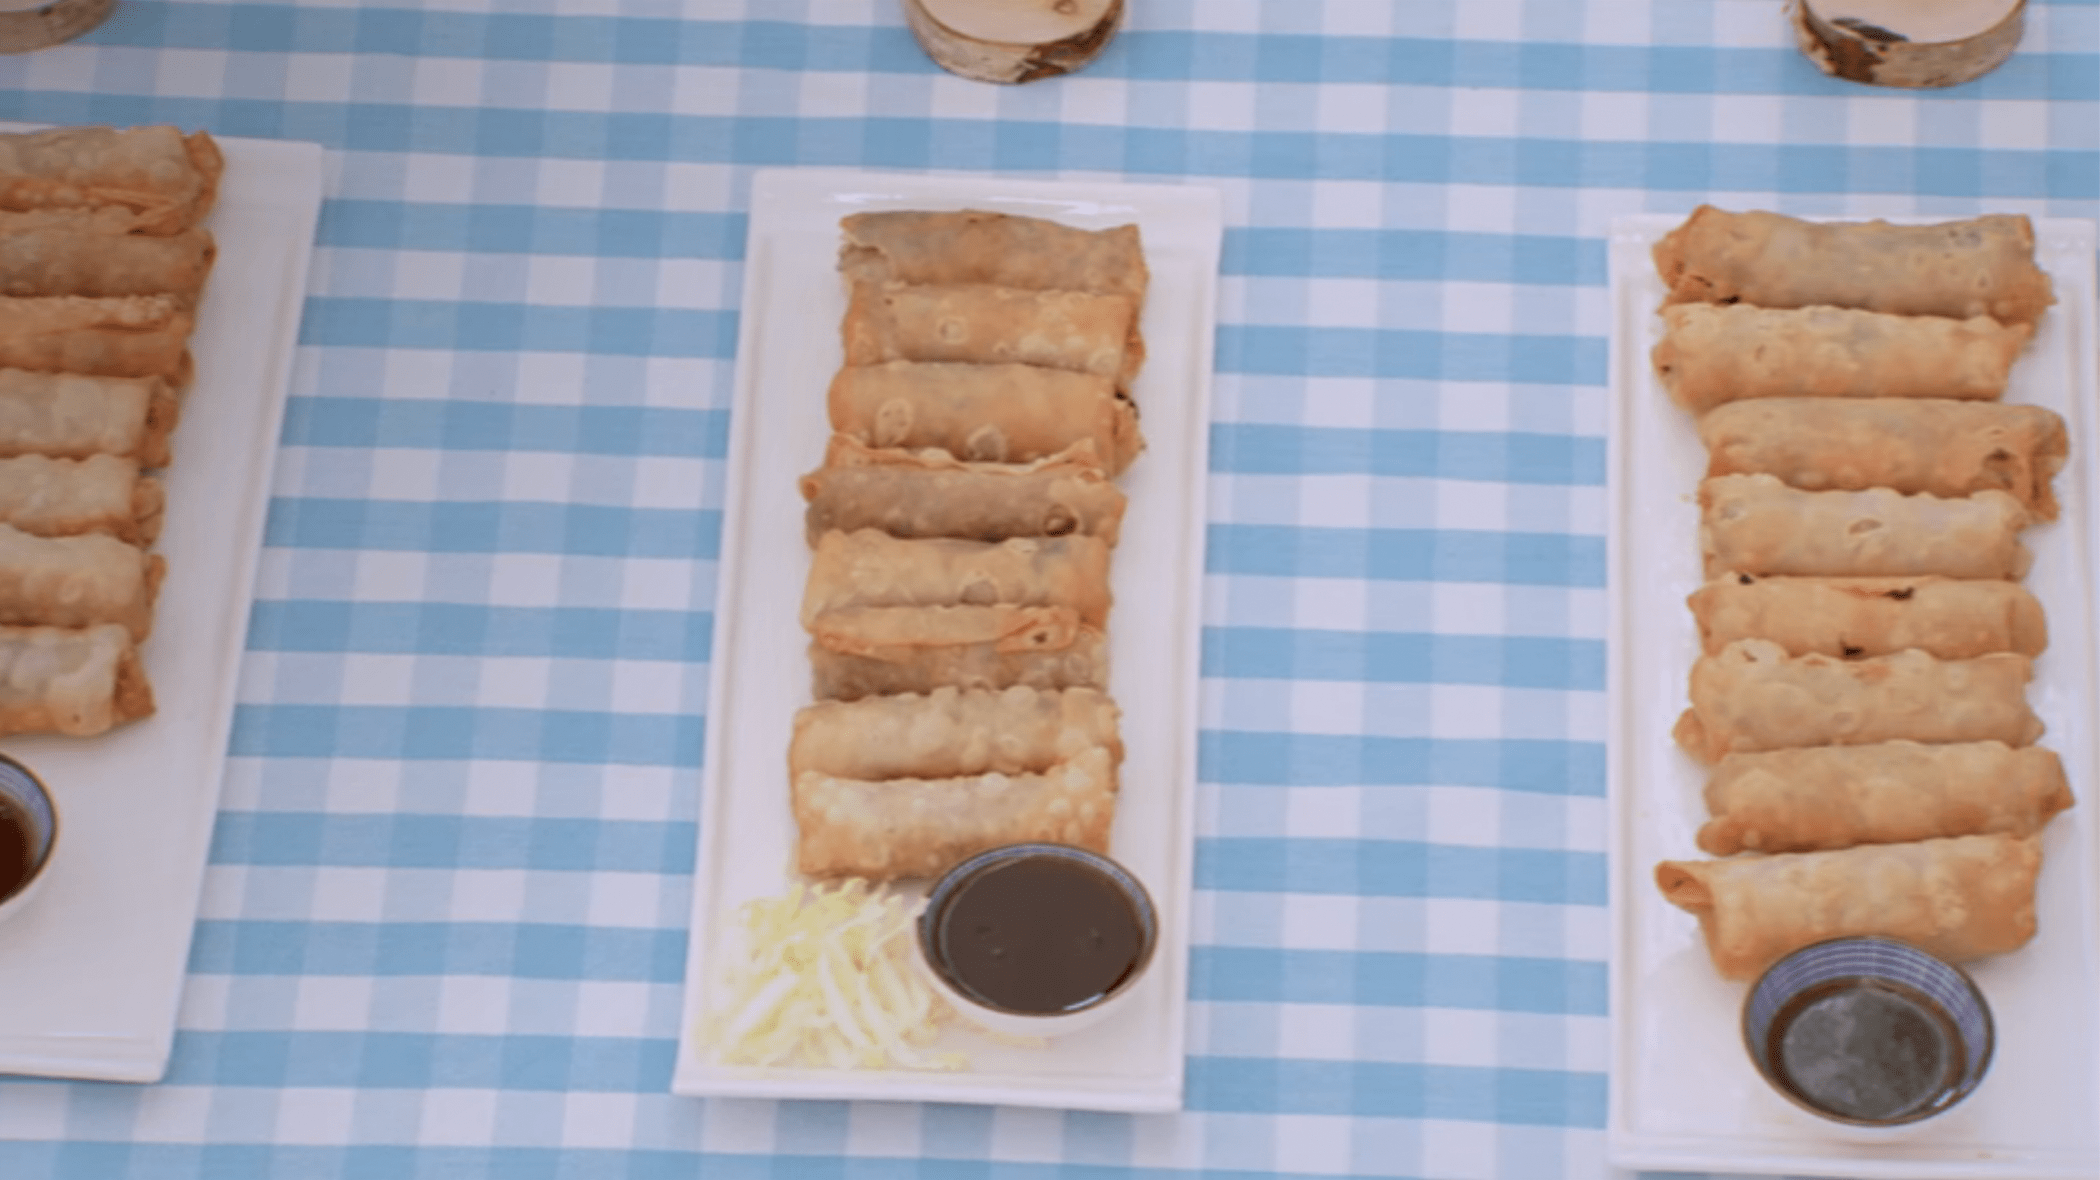 The contestants' spring rolls.